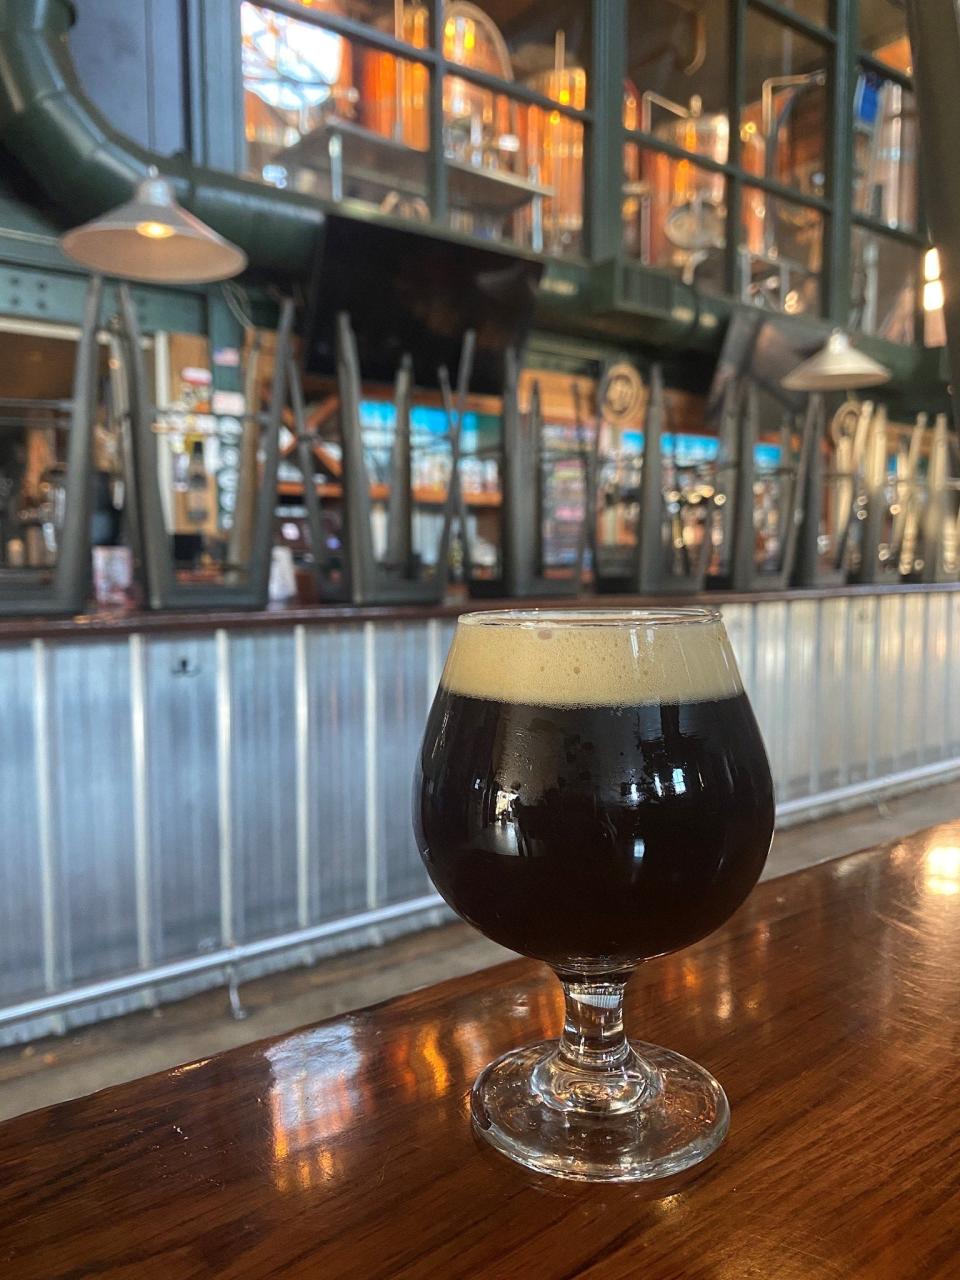 Against the Grain has released its 2021 holiday beer called Louisville Proper Pappy, a Kentucky Common barrel aged in Pappy Van Winkle barrels and blended with coffee.